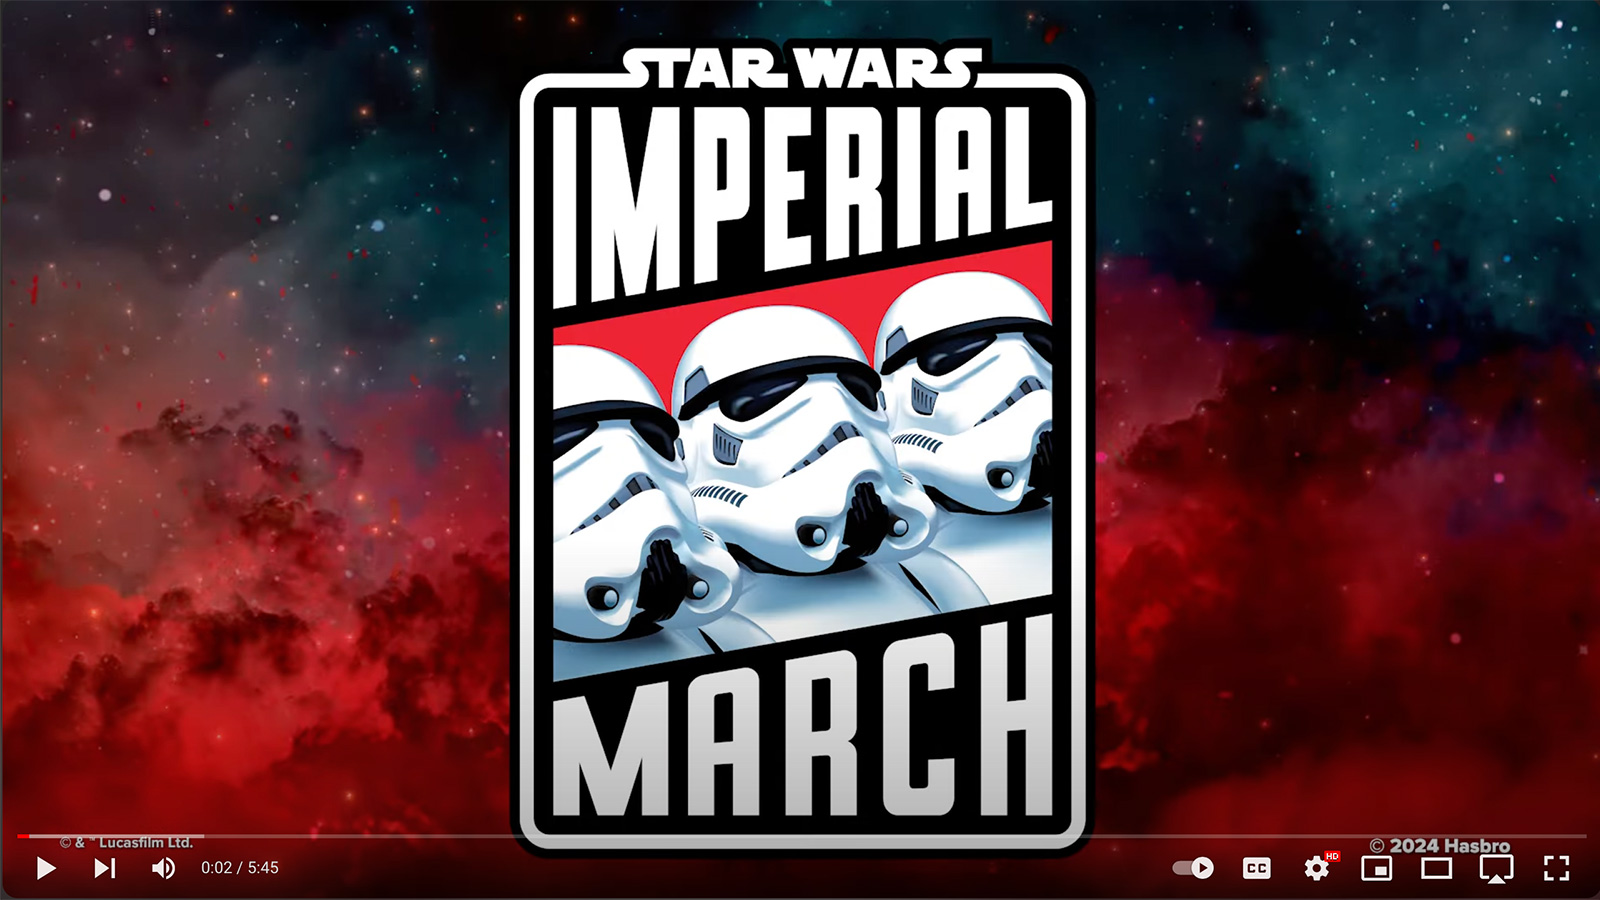 Hasbro Video - Star Wars Imperial March Experience in New York 3/21 - 3/23